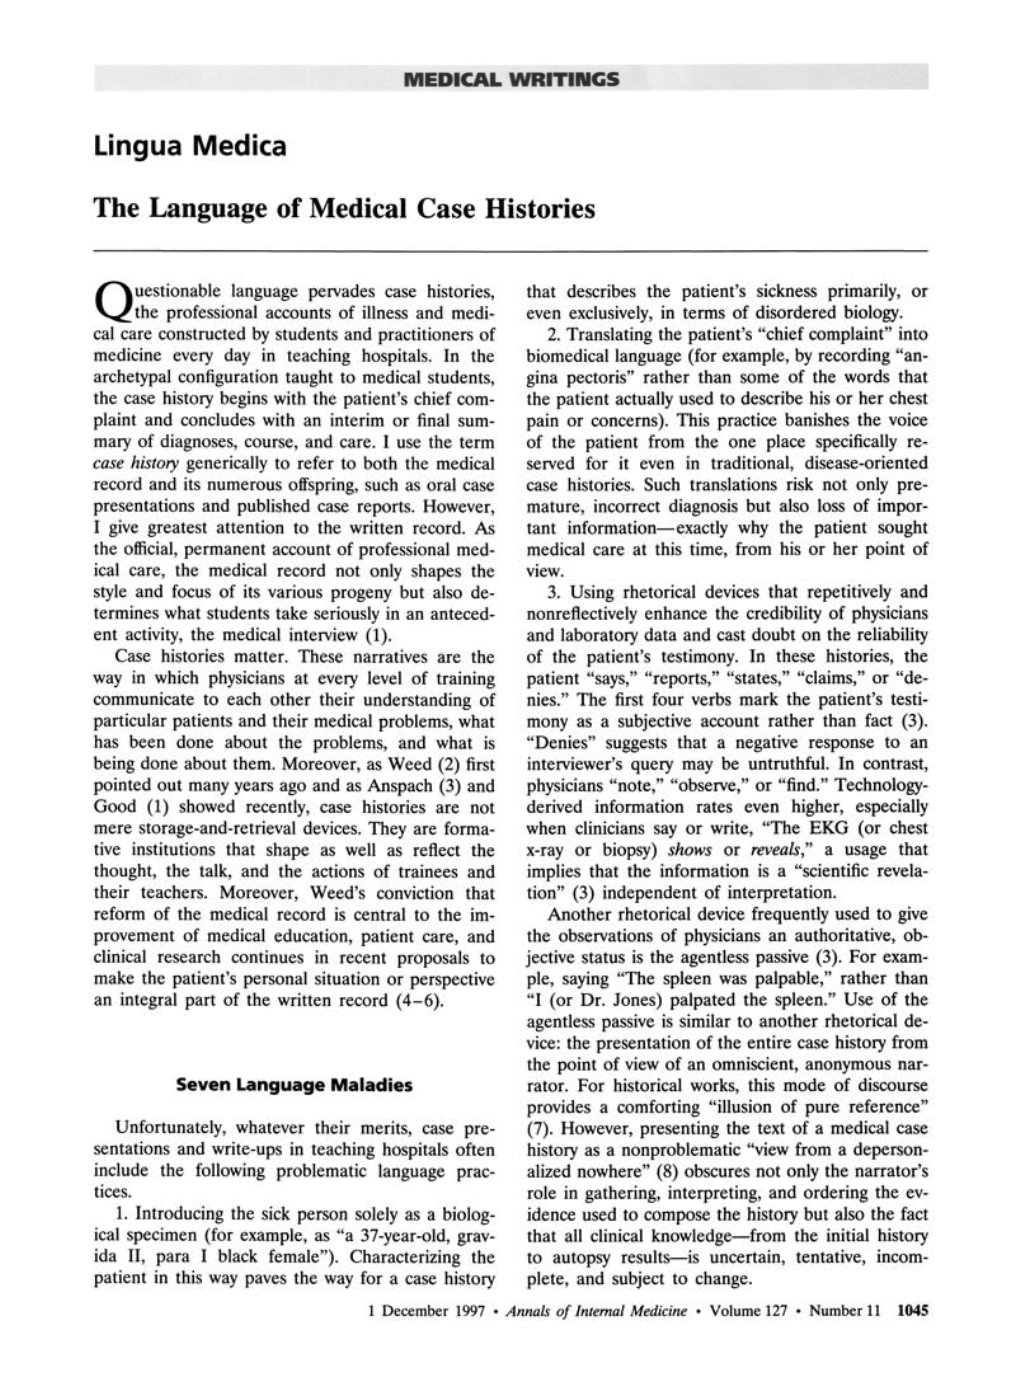 The Language of Medical Case Histories